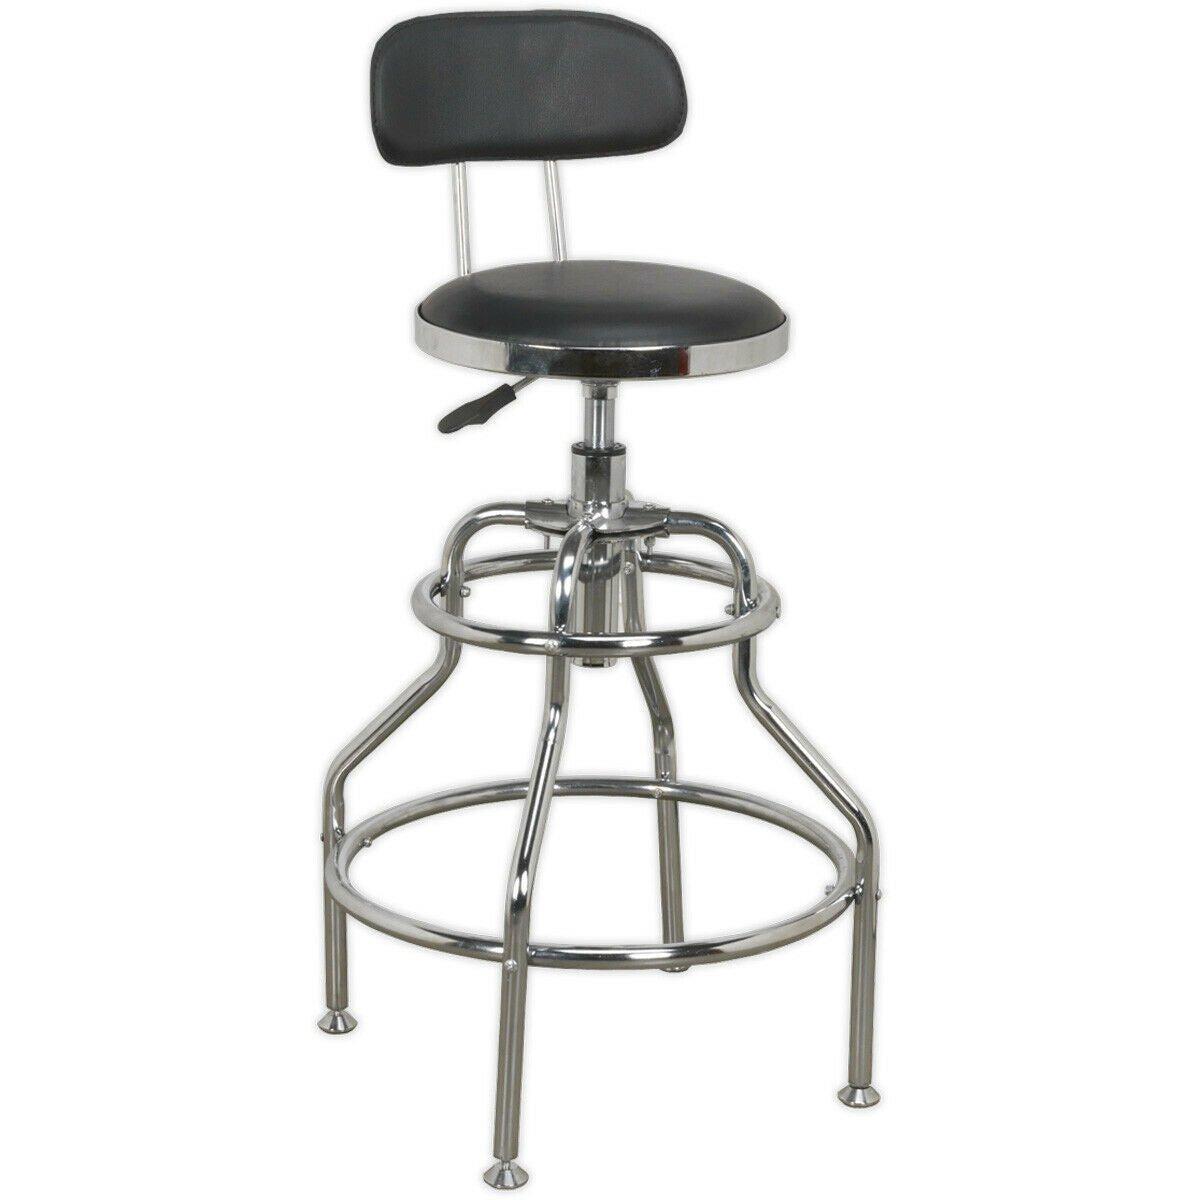 Heavy-Duty Pneumatic Workshop Stool - Adjustable Height Seat & Back Rest Chair